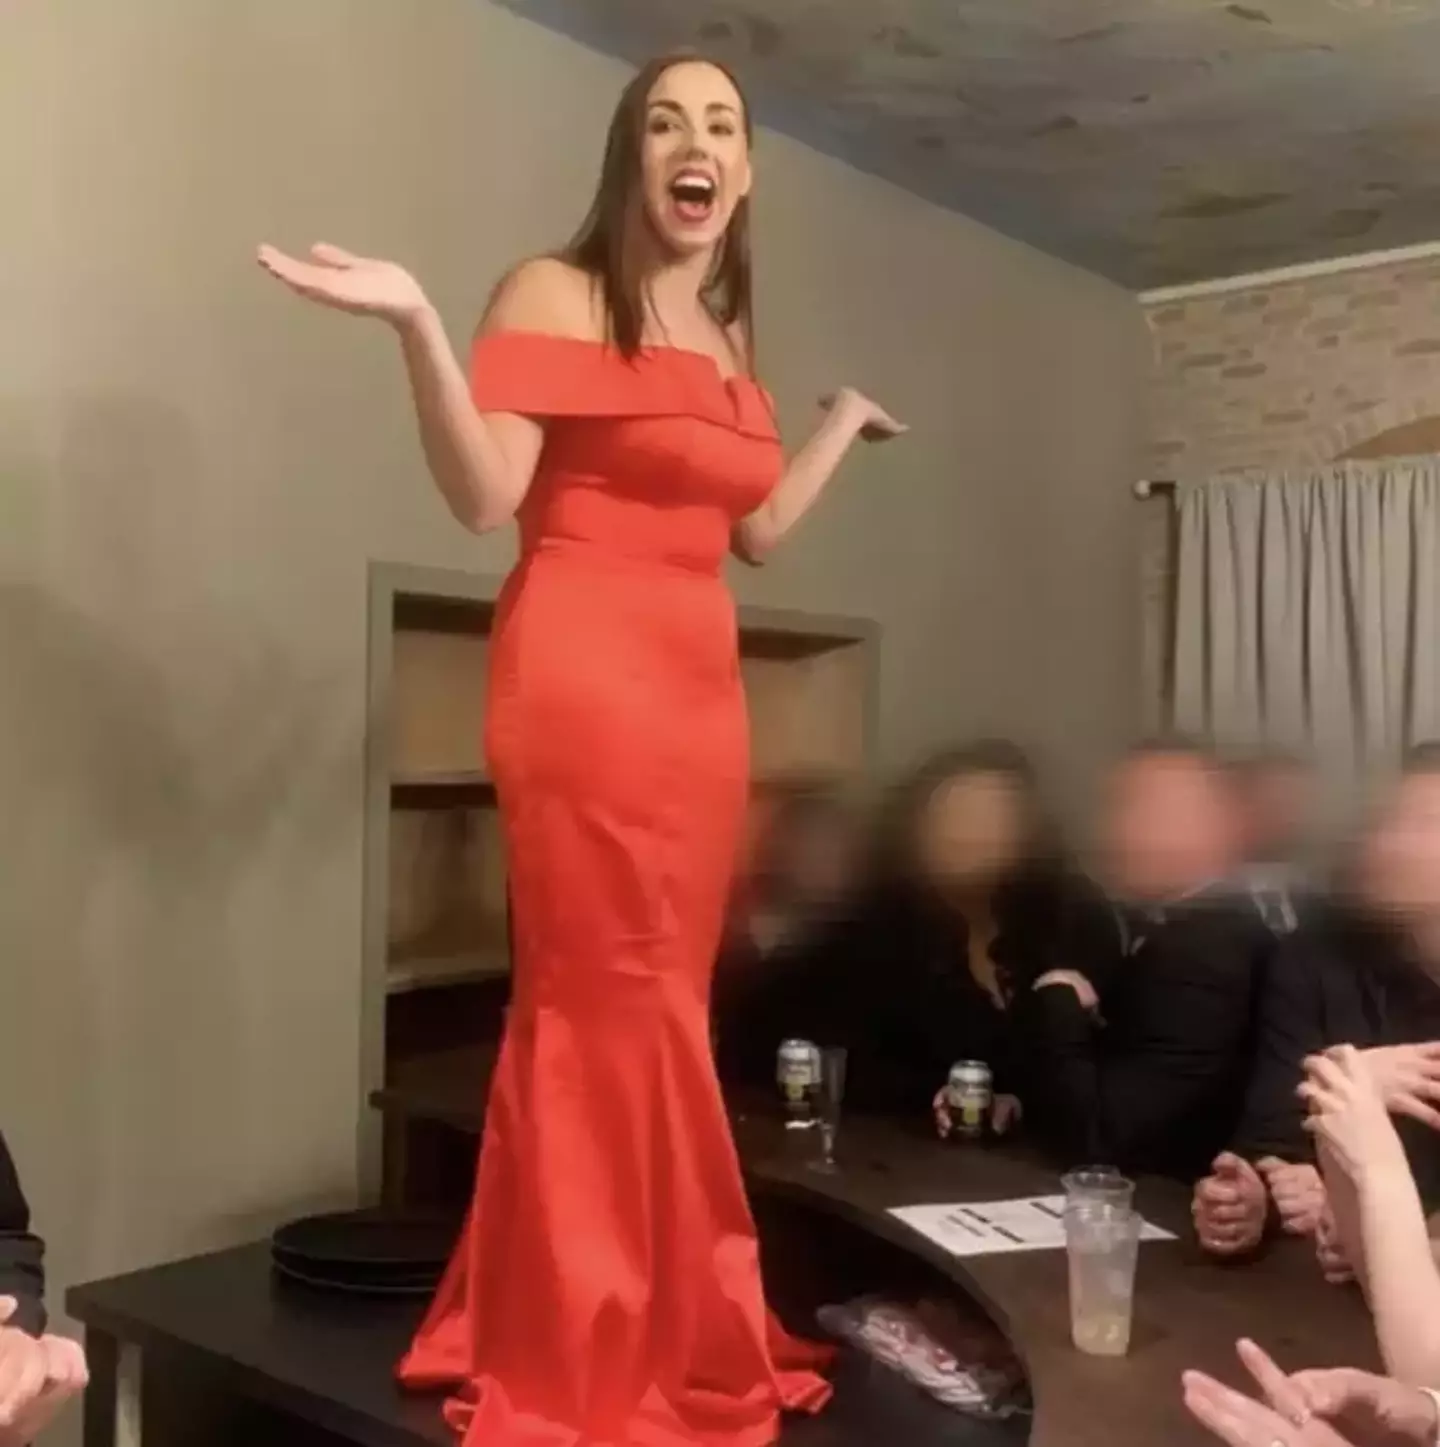 A swinging influencer felt like she was in The Wolf of Wall Street during a 50-person sex party.